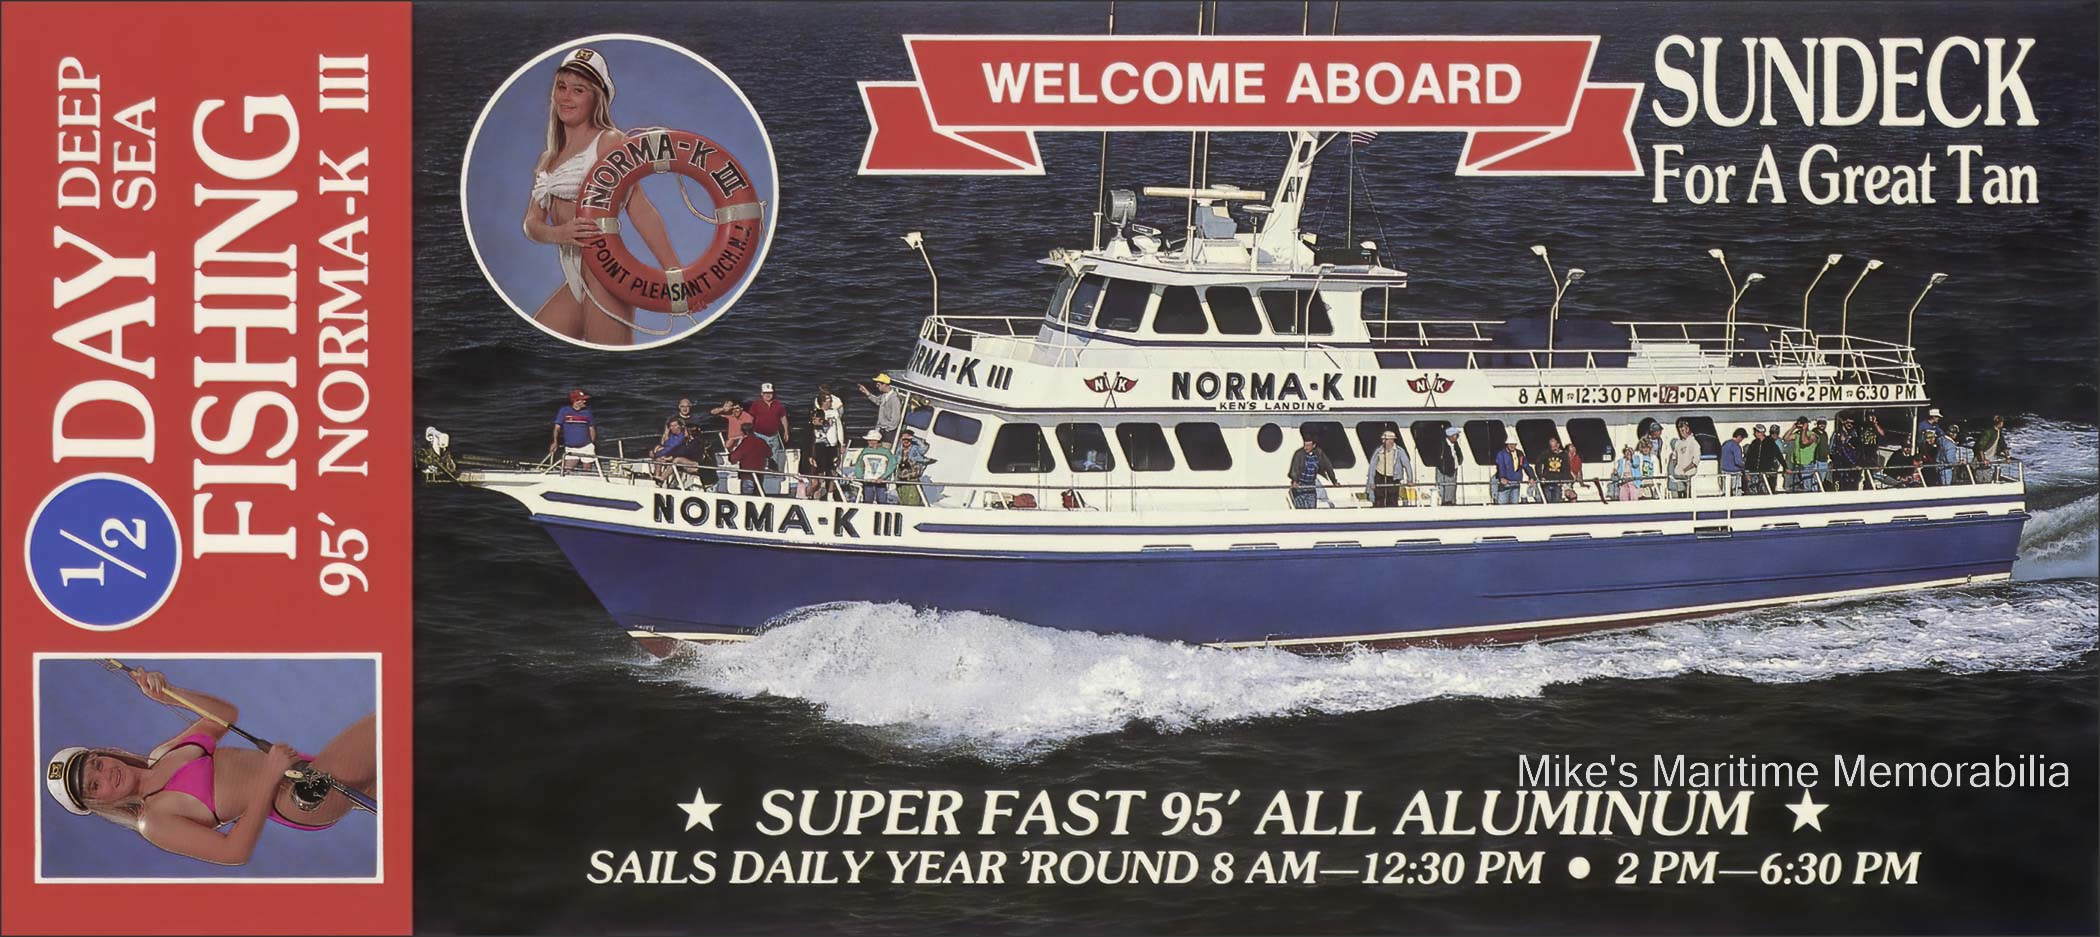 NORMA-K III Rack Card, Point Pleasant Beach, NJ – 1994 A rack card for Captain Ken Keller's "NORMA K III" from Ken's Landing at Point Pleasant Beach, NJ circa 1994. She was built in 1975 by Gulf Craft at Patterson, LA and is still operated by the Keller family.